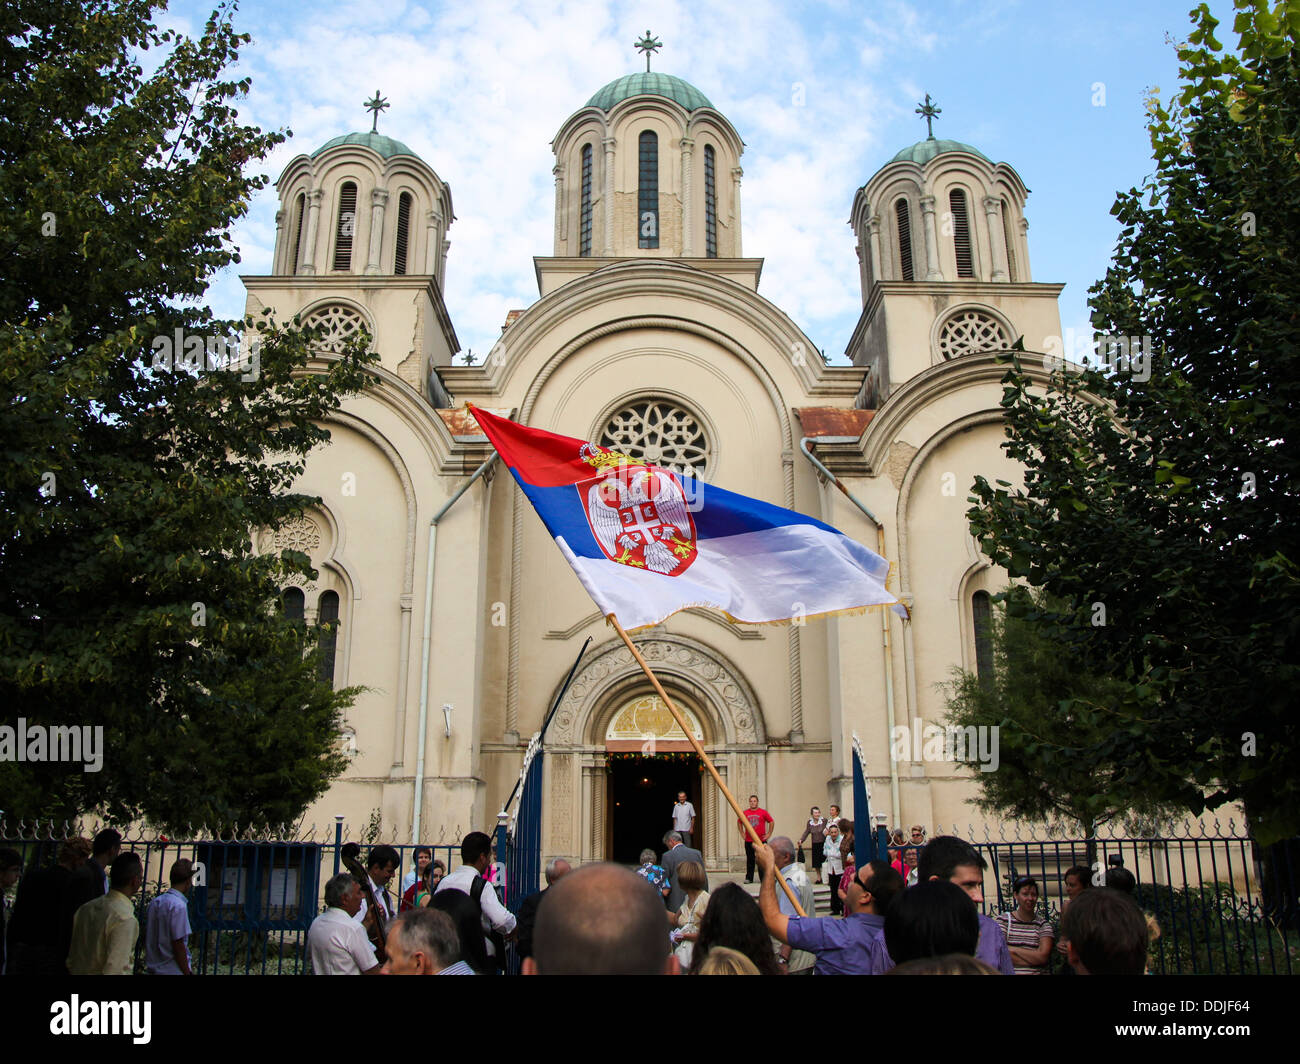 Wedding celebration in front of Orthodox church in Serbia Stock Photo